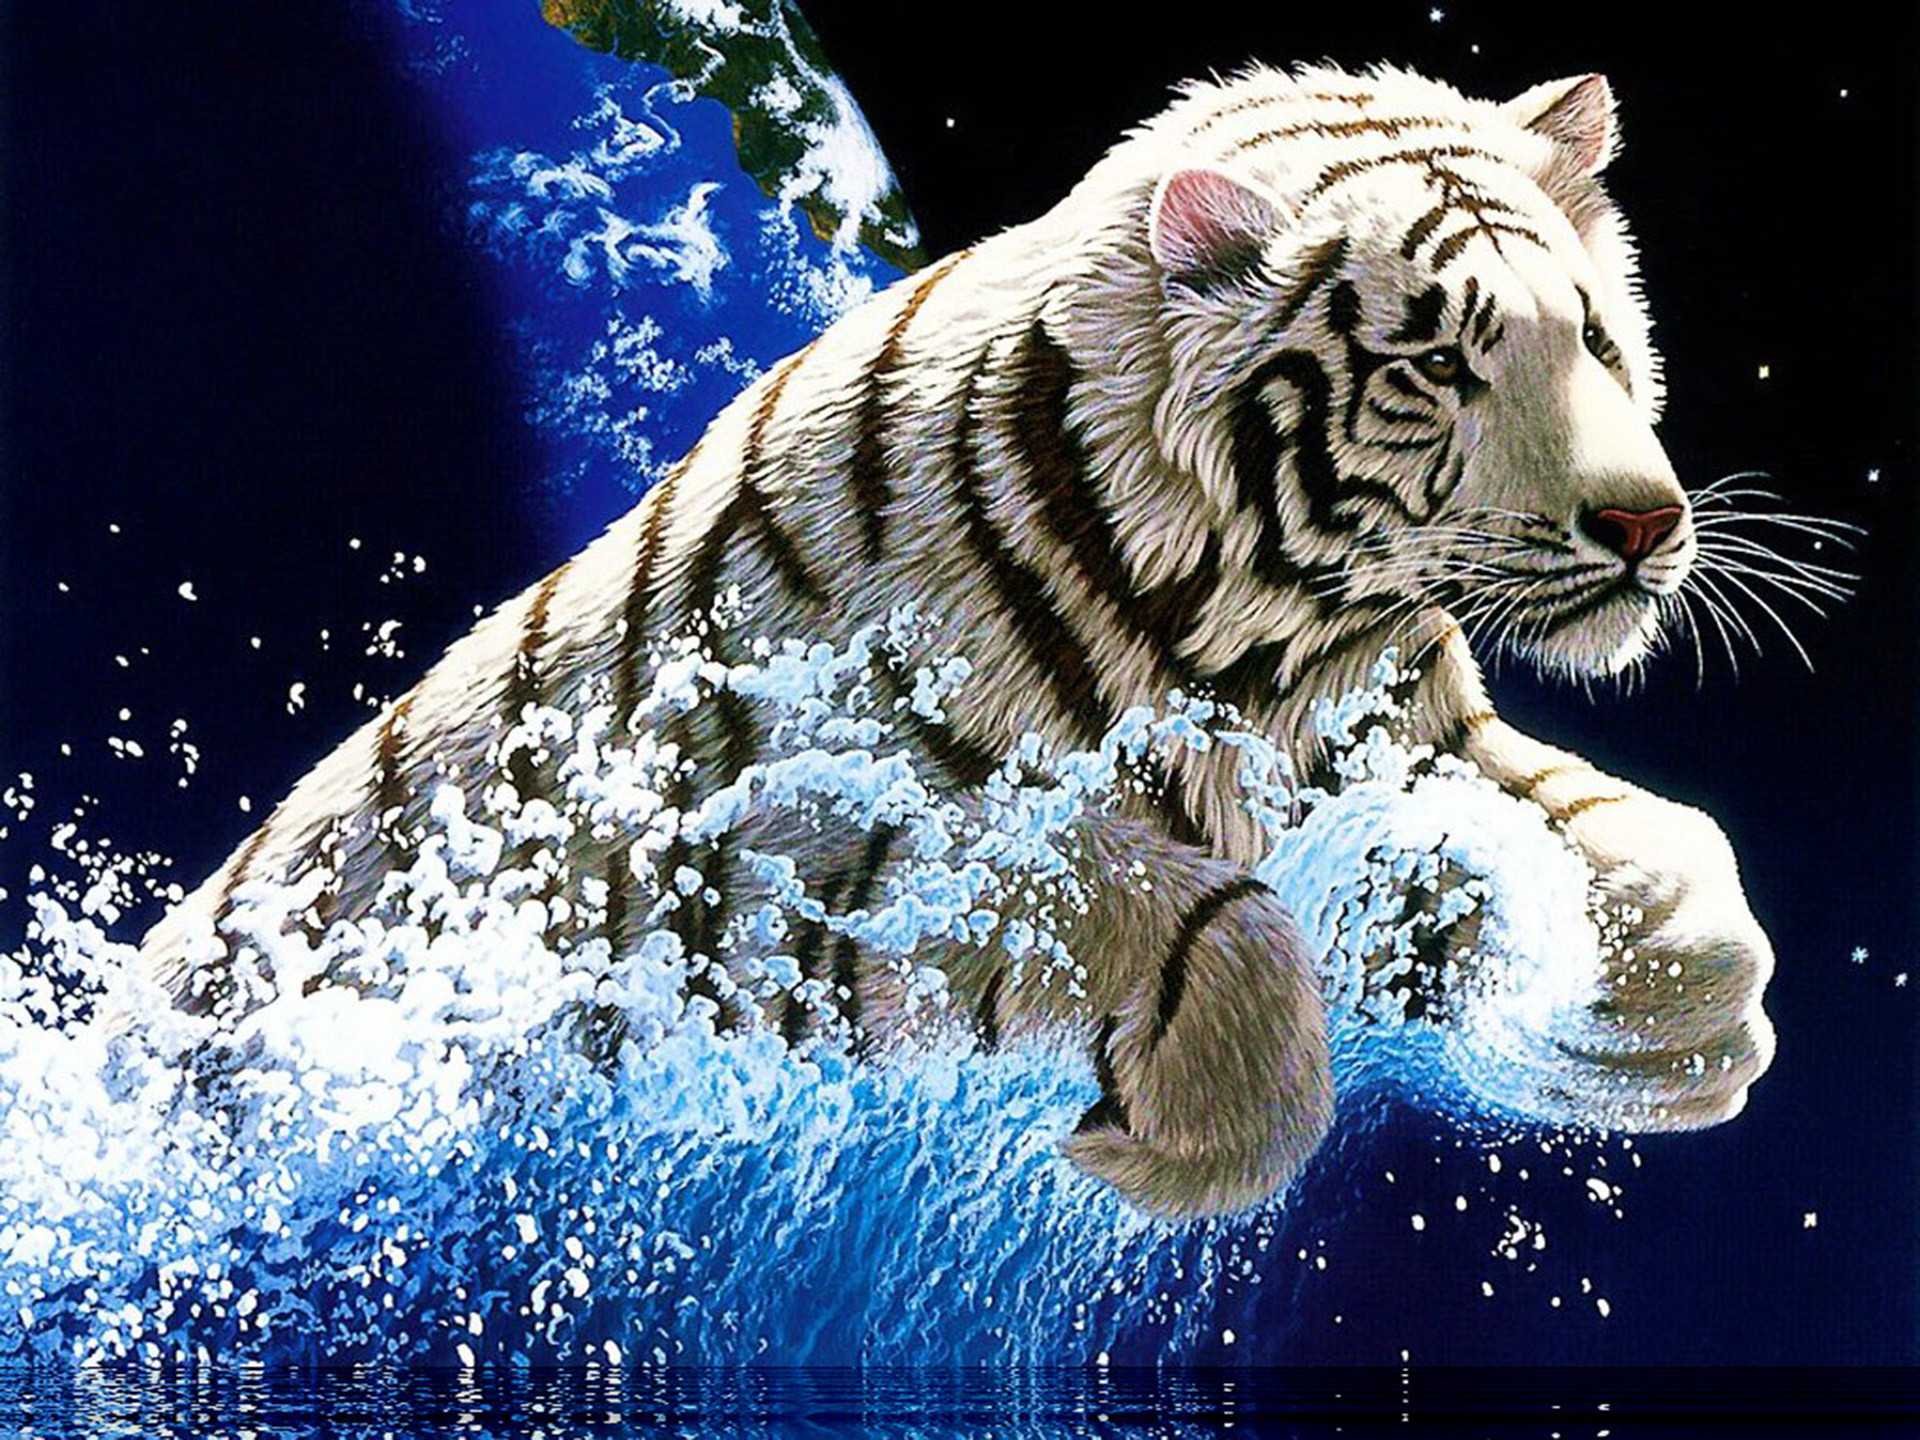 White Tiger Wallpaper 63 Pictures